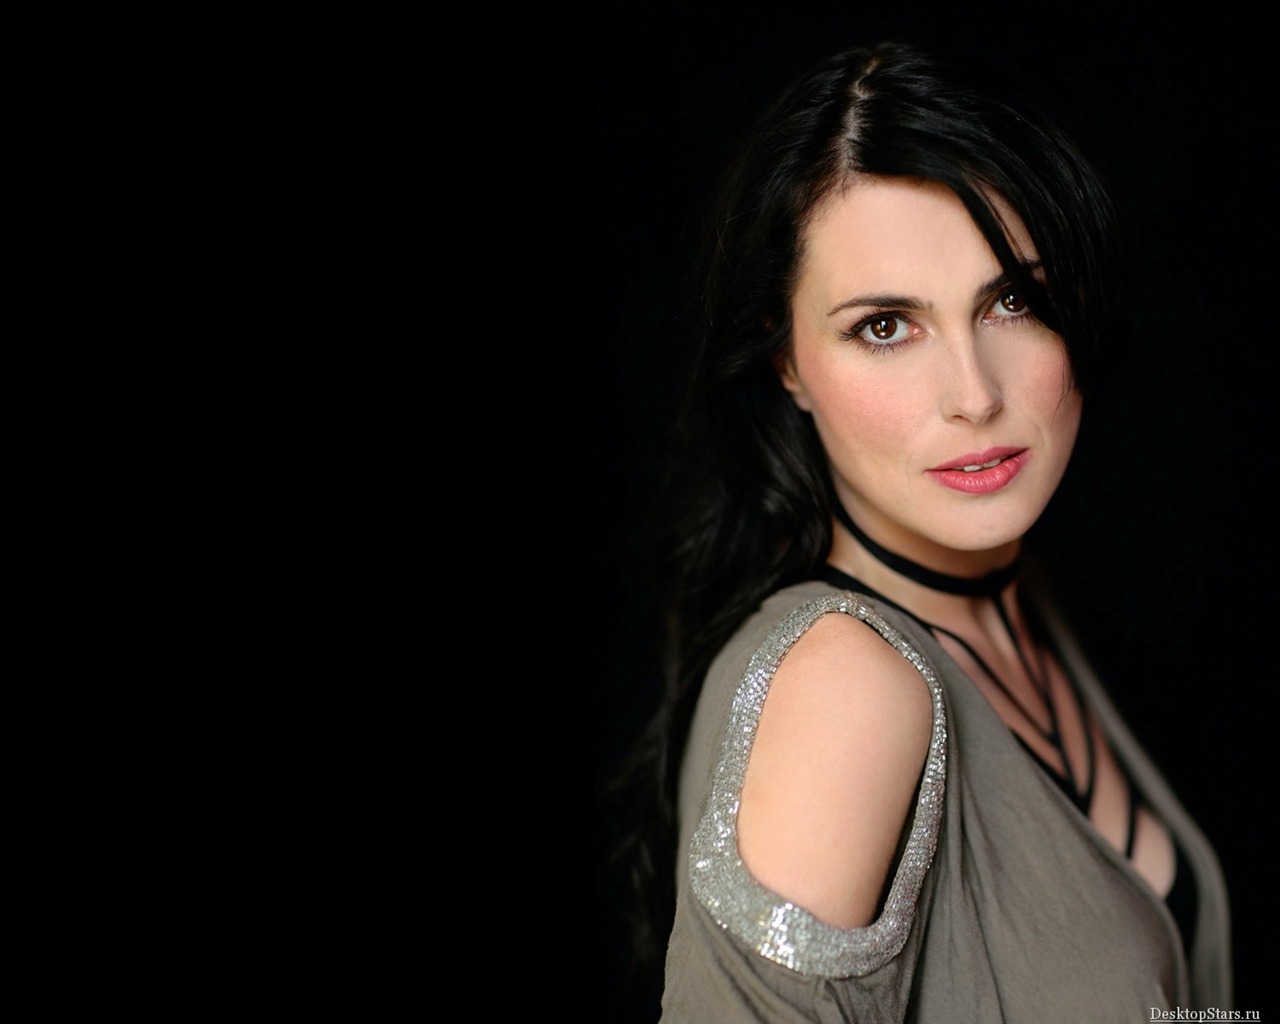 Sharon den Adel #004 - 1280x1024 Wallpapers Pictures Photos Images